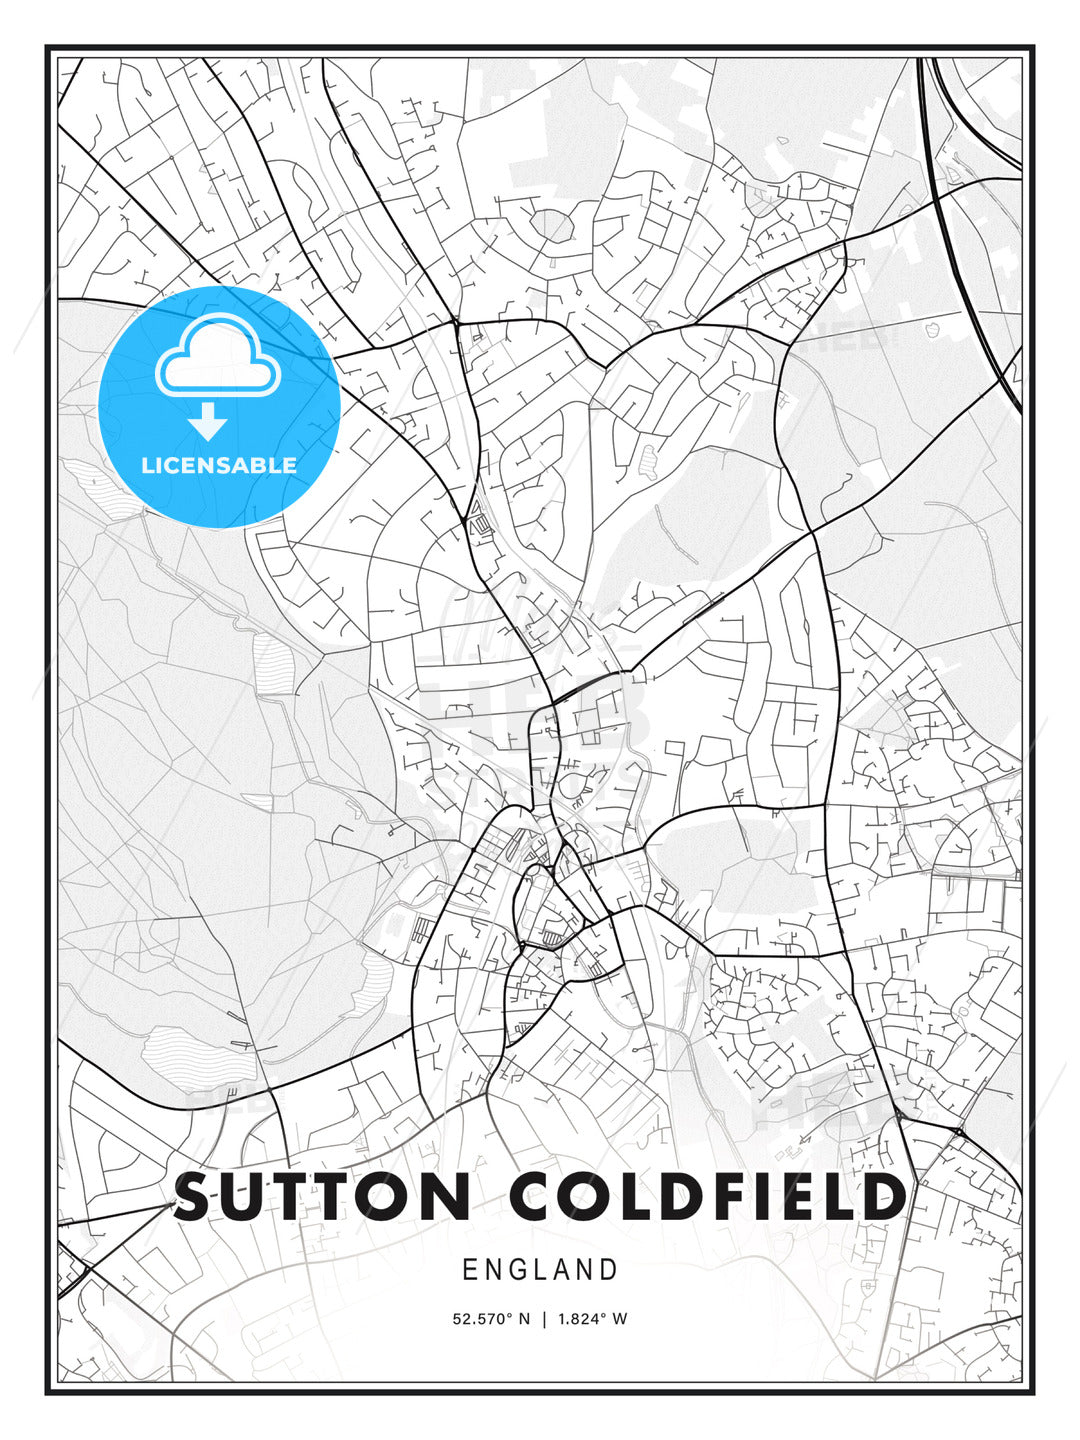 Sutton Coldfield, England, Modern Print Template in Various Formats - HEBSTREITS Sketches